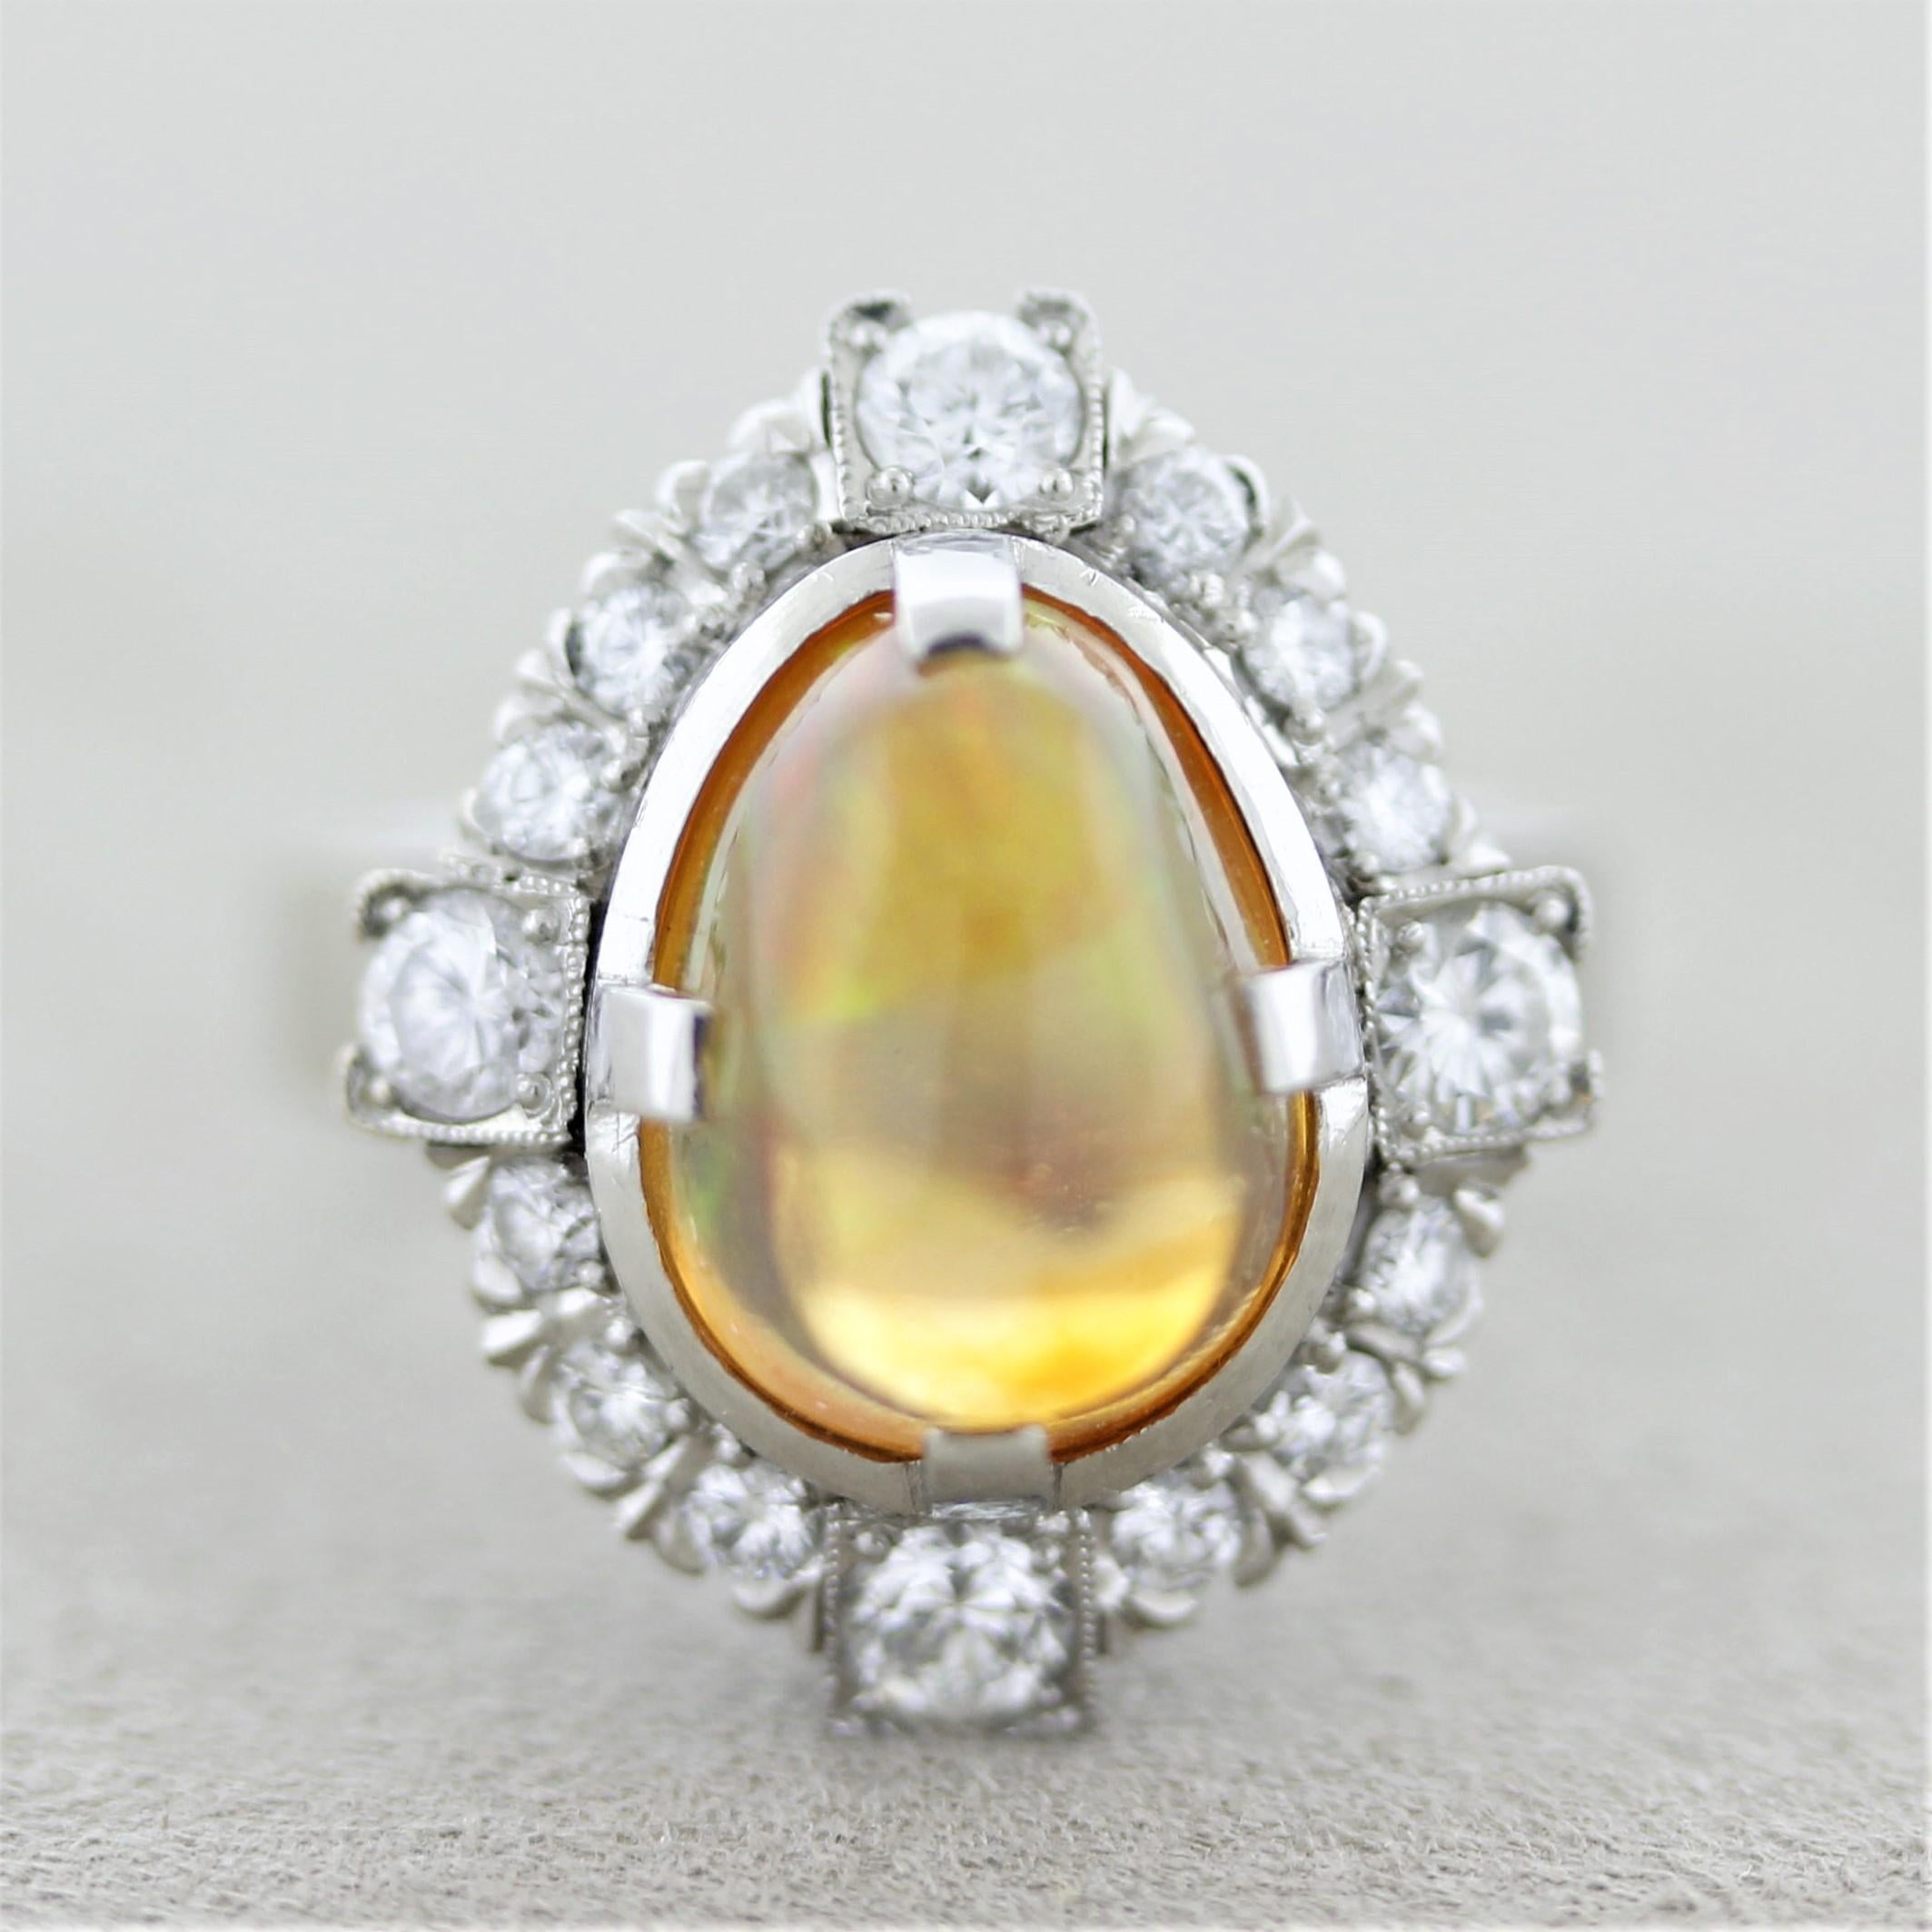 A lovely ring made in the 1960’s featuring a fine Mexican fire opal weighing approximately 3 carats. It has a rich jelly orange color as well as possessing excellent play-of-color as flashes of blue, green, red, orange, and yellow dance across the